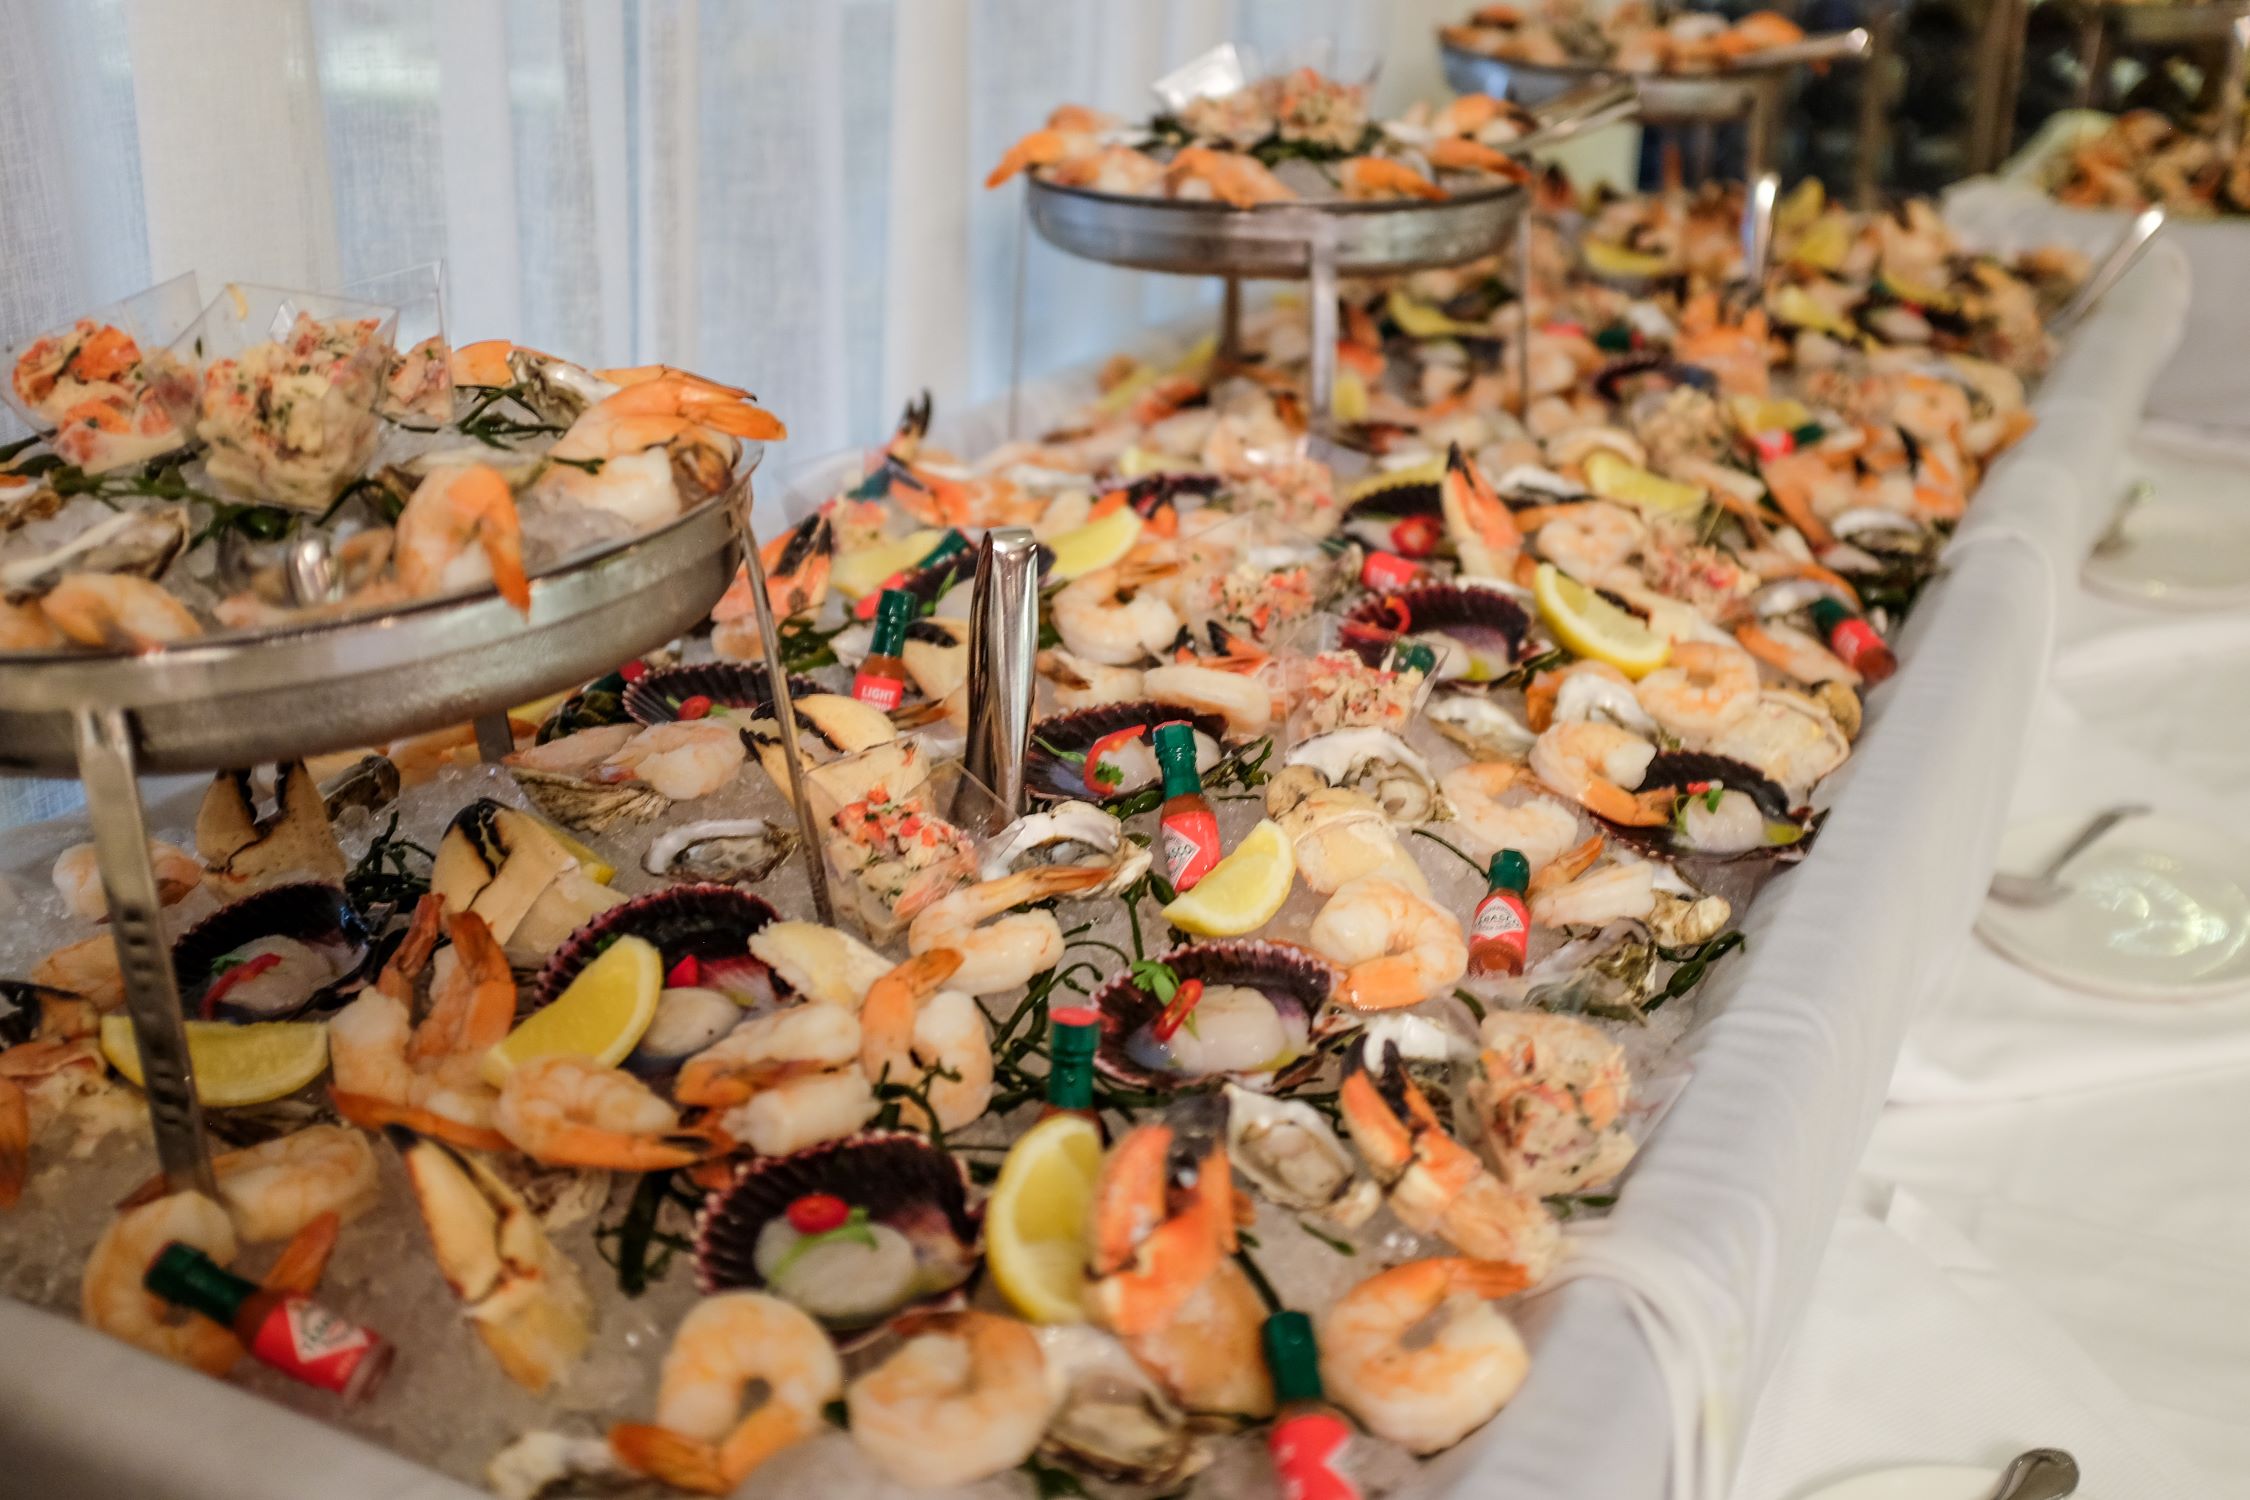 An image of Baltaire's iced shellfish station.